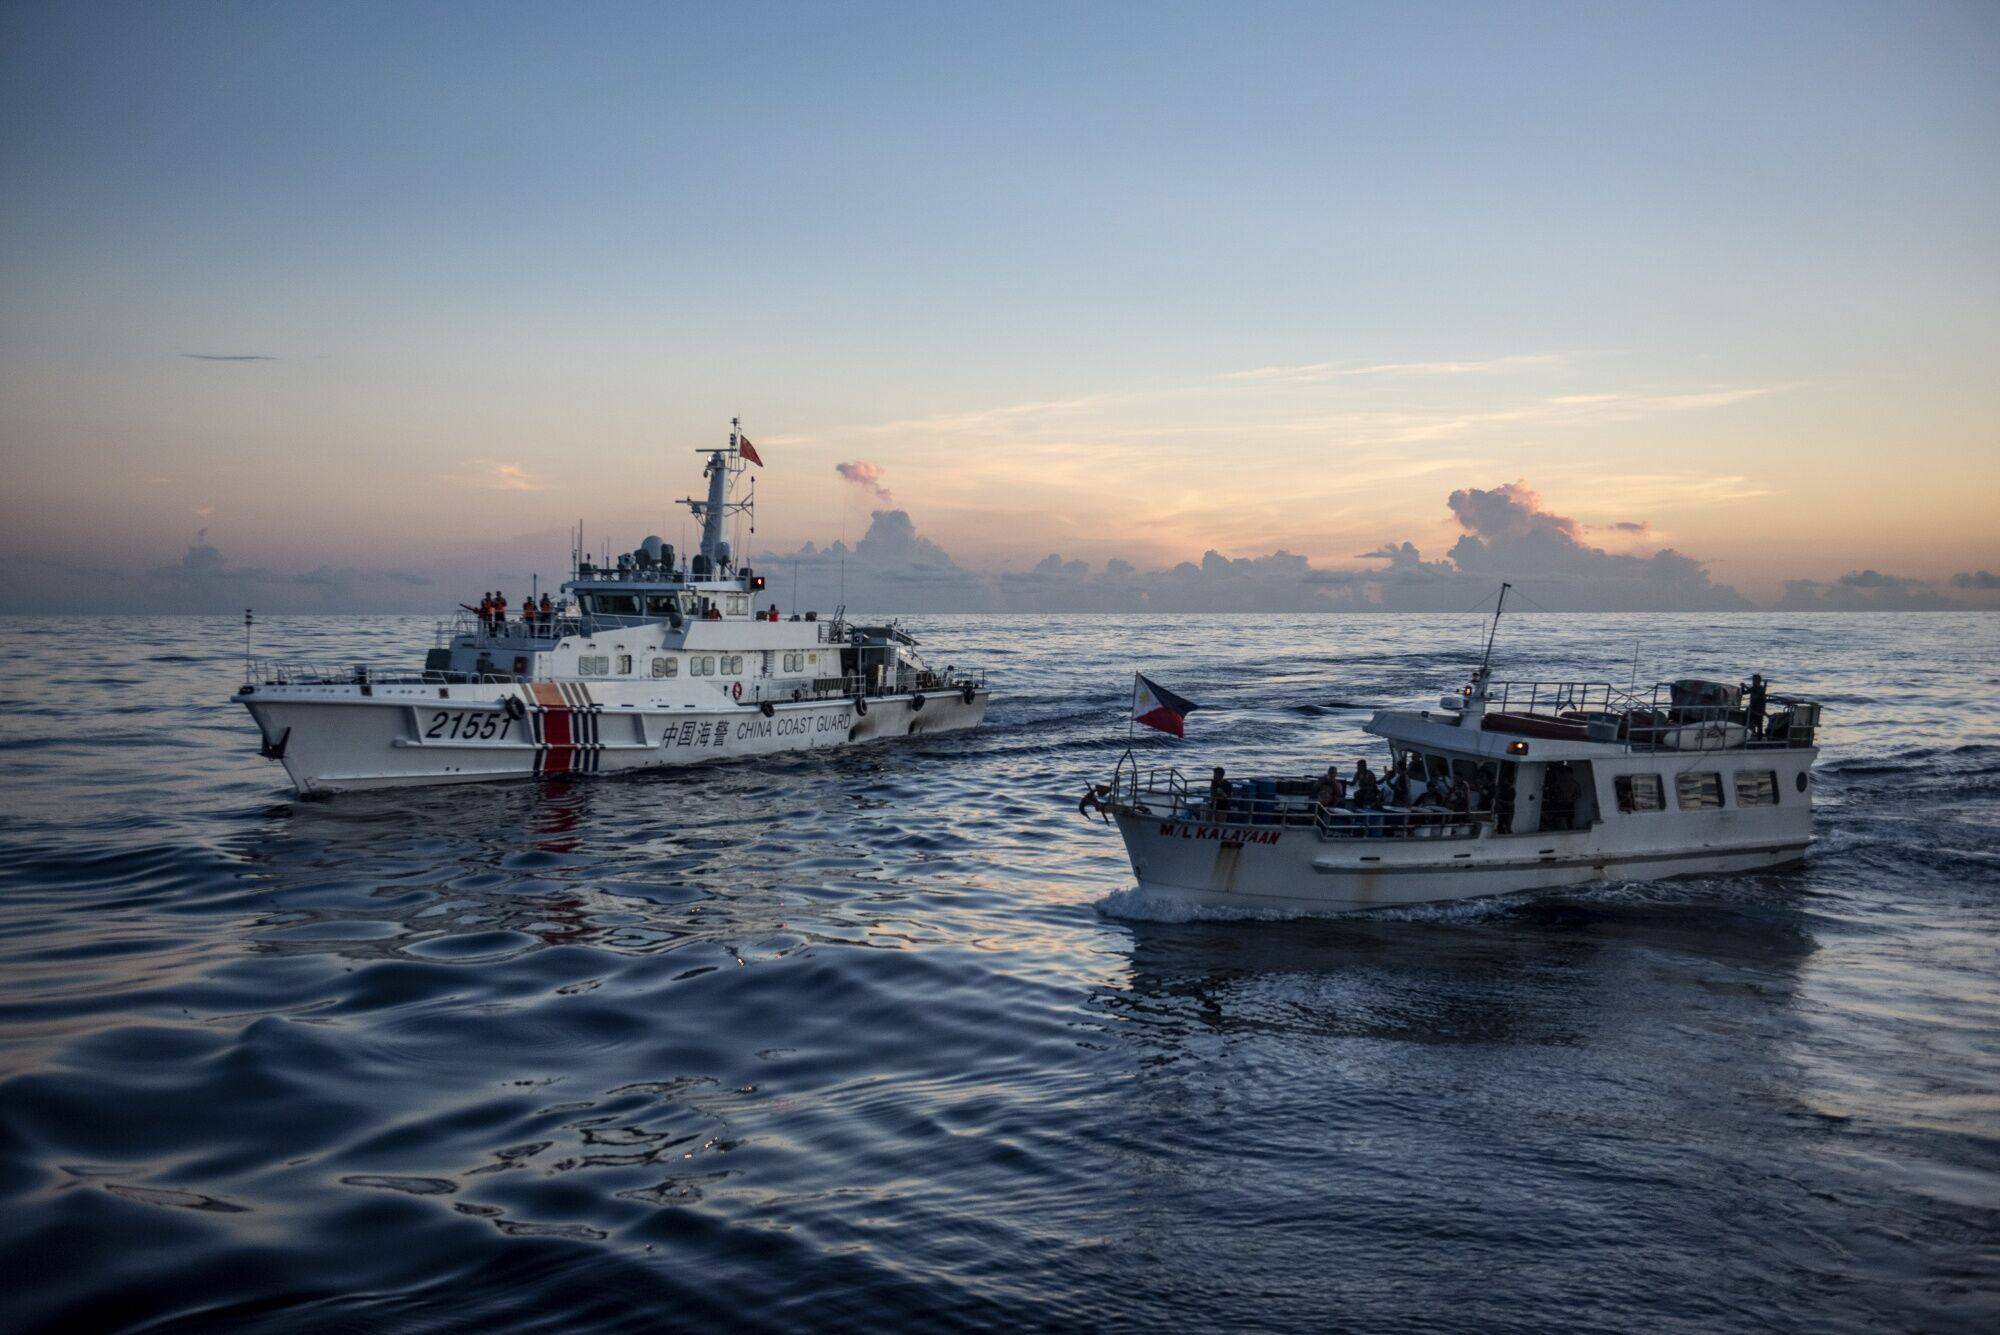 Coastguards from the two countries have repeatedly clashed in disputed waters. Photo: Bloomberg